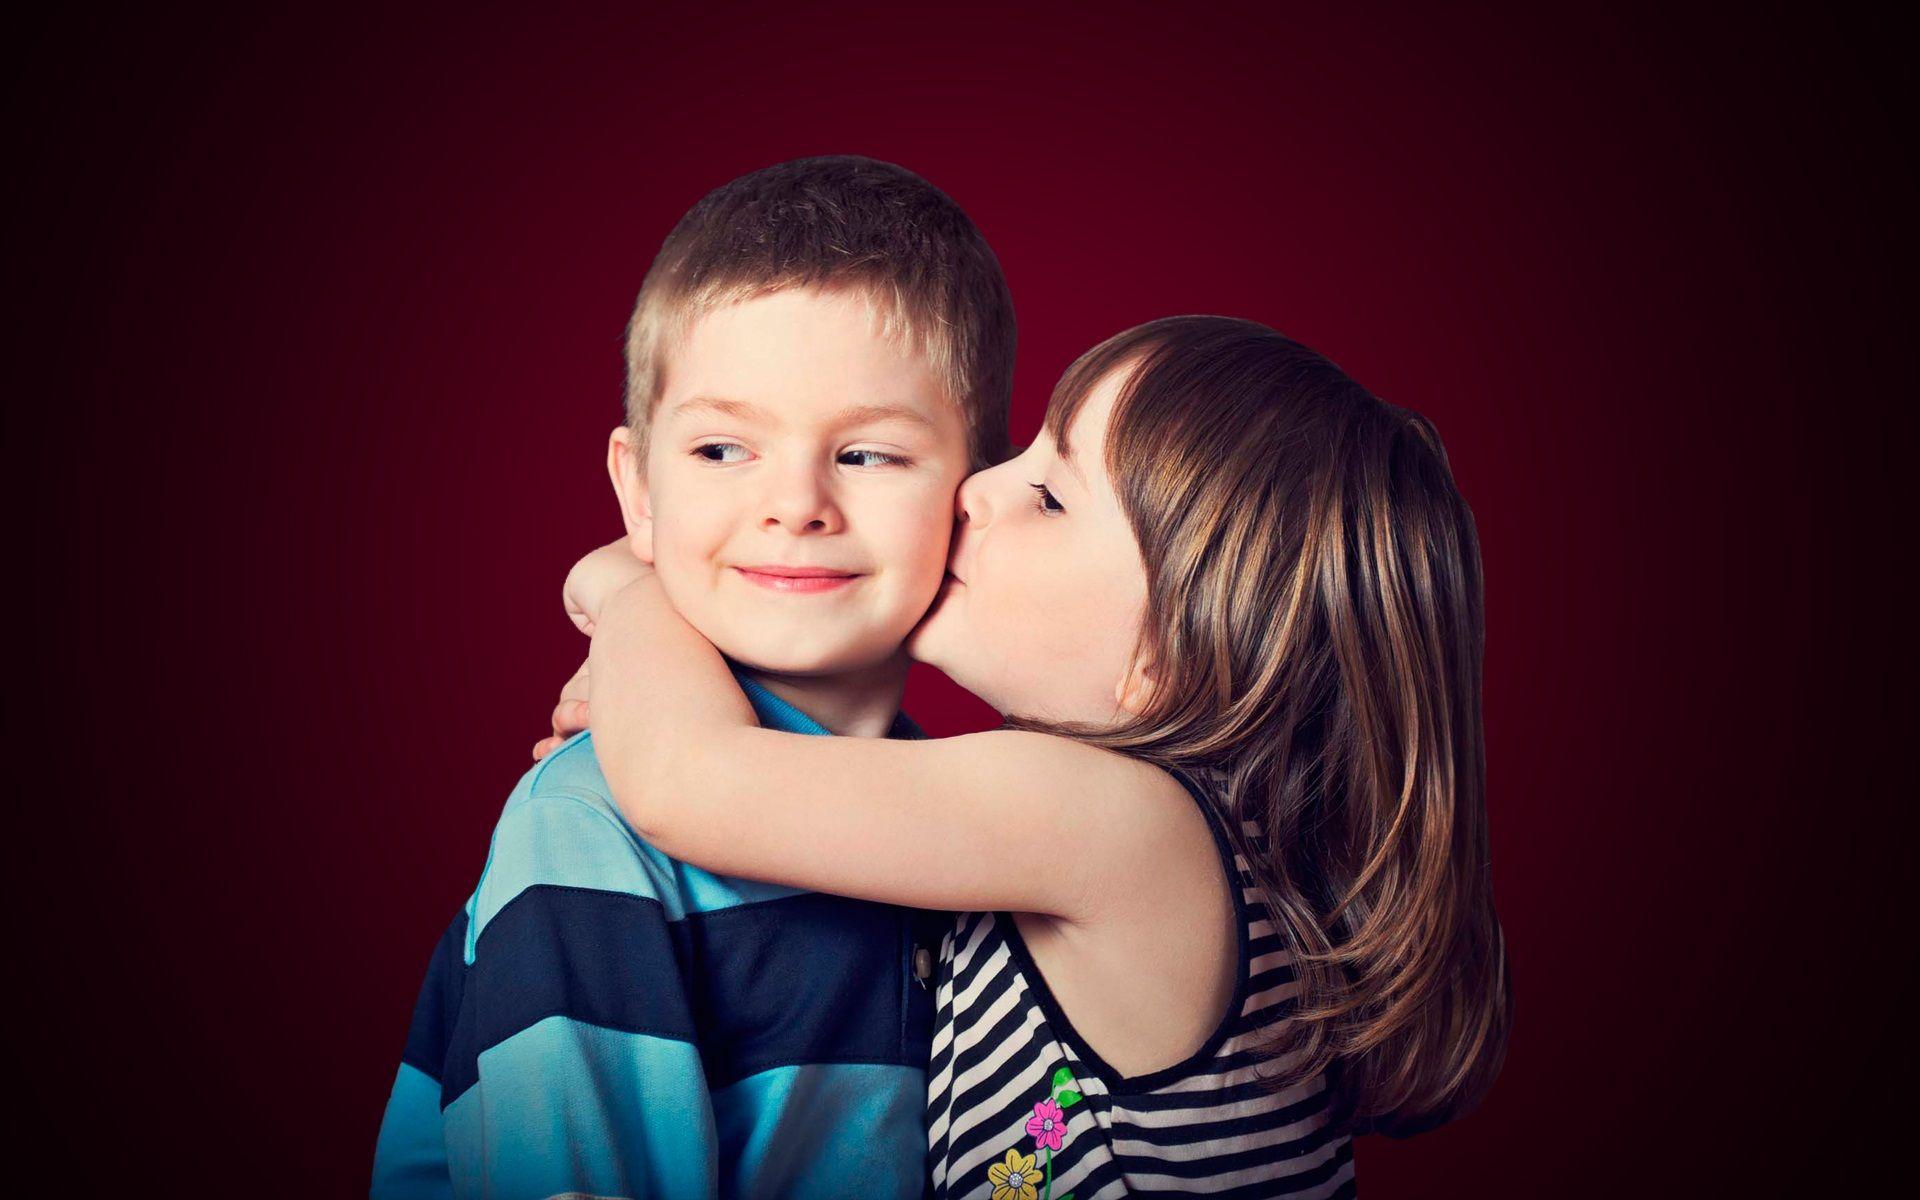 COUPLES WALLPAPER. Cute baby couple, Romantic hugs and kisses, Cute couples teenagers